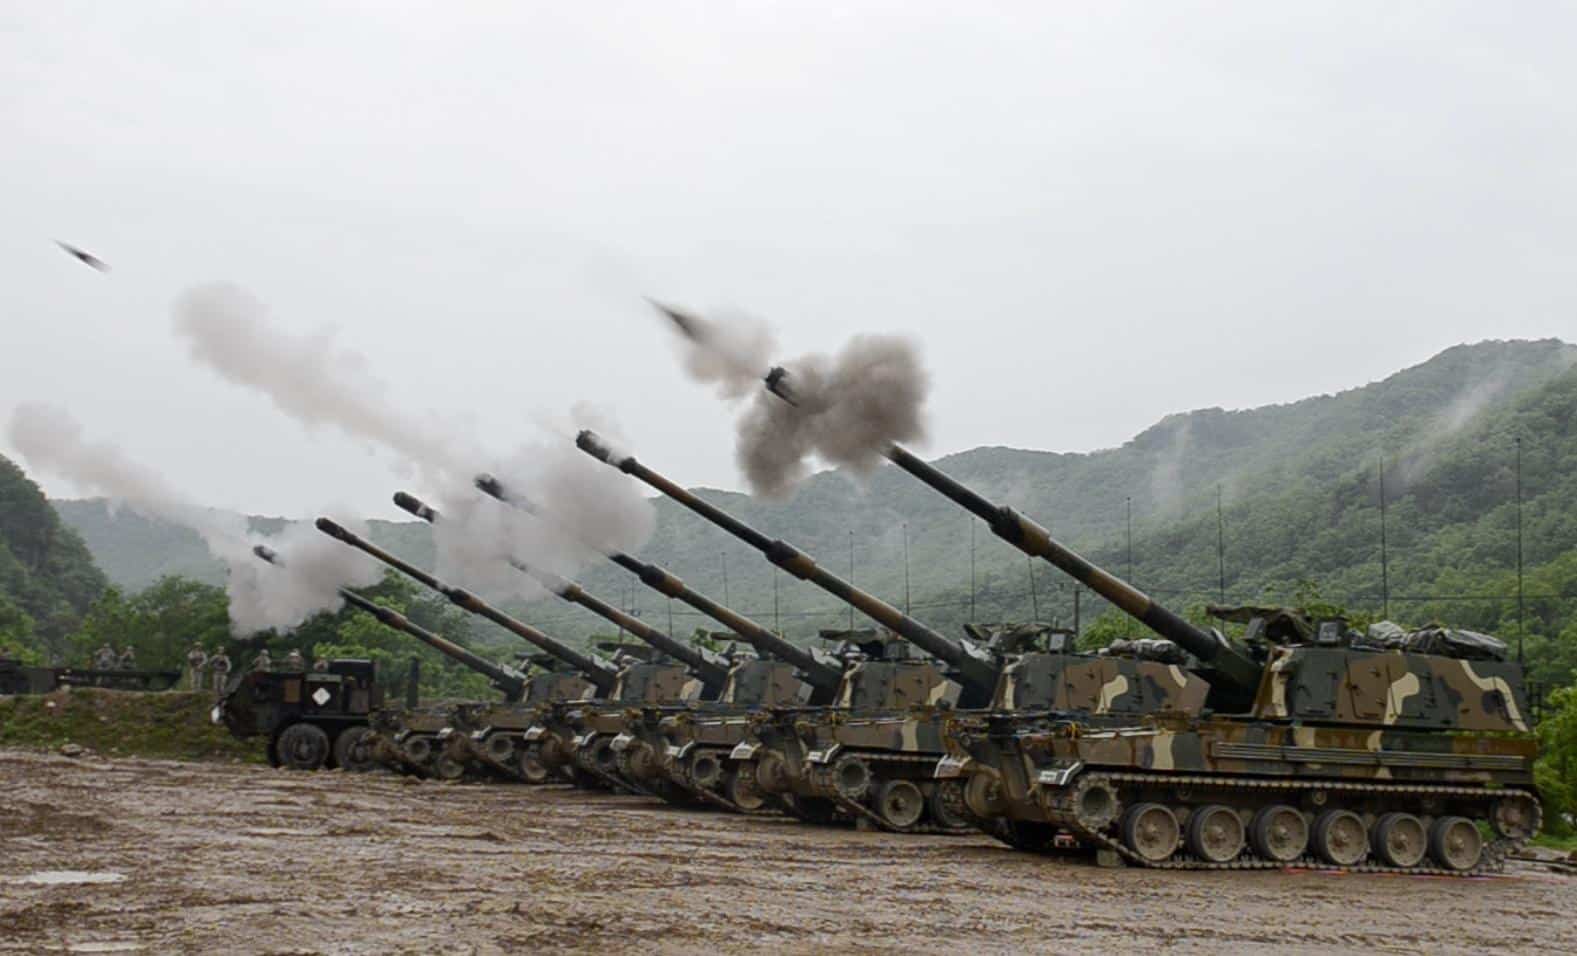 South Korean Soldiers in the 631st Field Artillery Battalion, 26th Mechanized Infantry Division Artillery, coordinate fires from a battery of six K9 Thunder 155 mm self-propelled howitzers May 10, in a joint artillery exercise with Soldiers from the U.S. Army 1st Battalion, 82nd Field Artillery Regiment, 1st Armored Brigade Combat Team, 1st Cavalry Division. (U.S. Army photo by Pfc. Dasol Choi, 1st Armored Brigade Combat Team Public Affairs, 1st Cav. Div.)